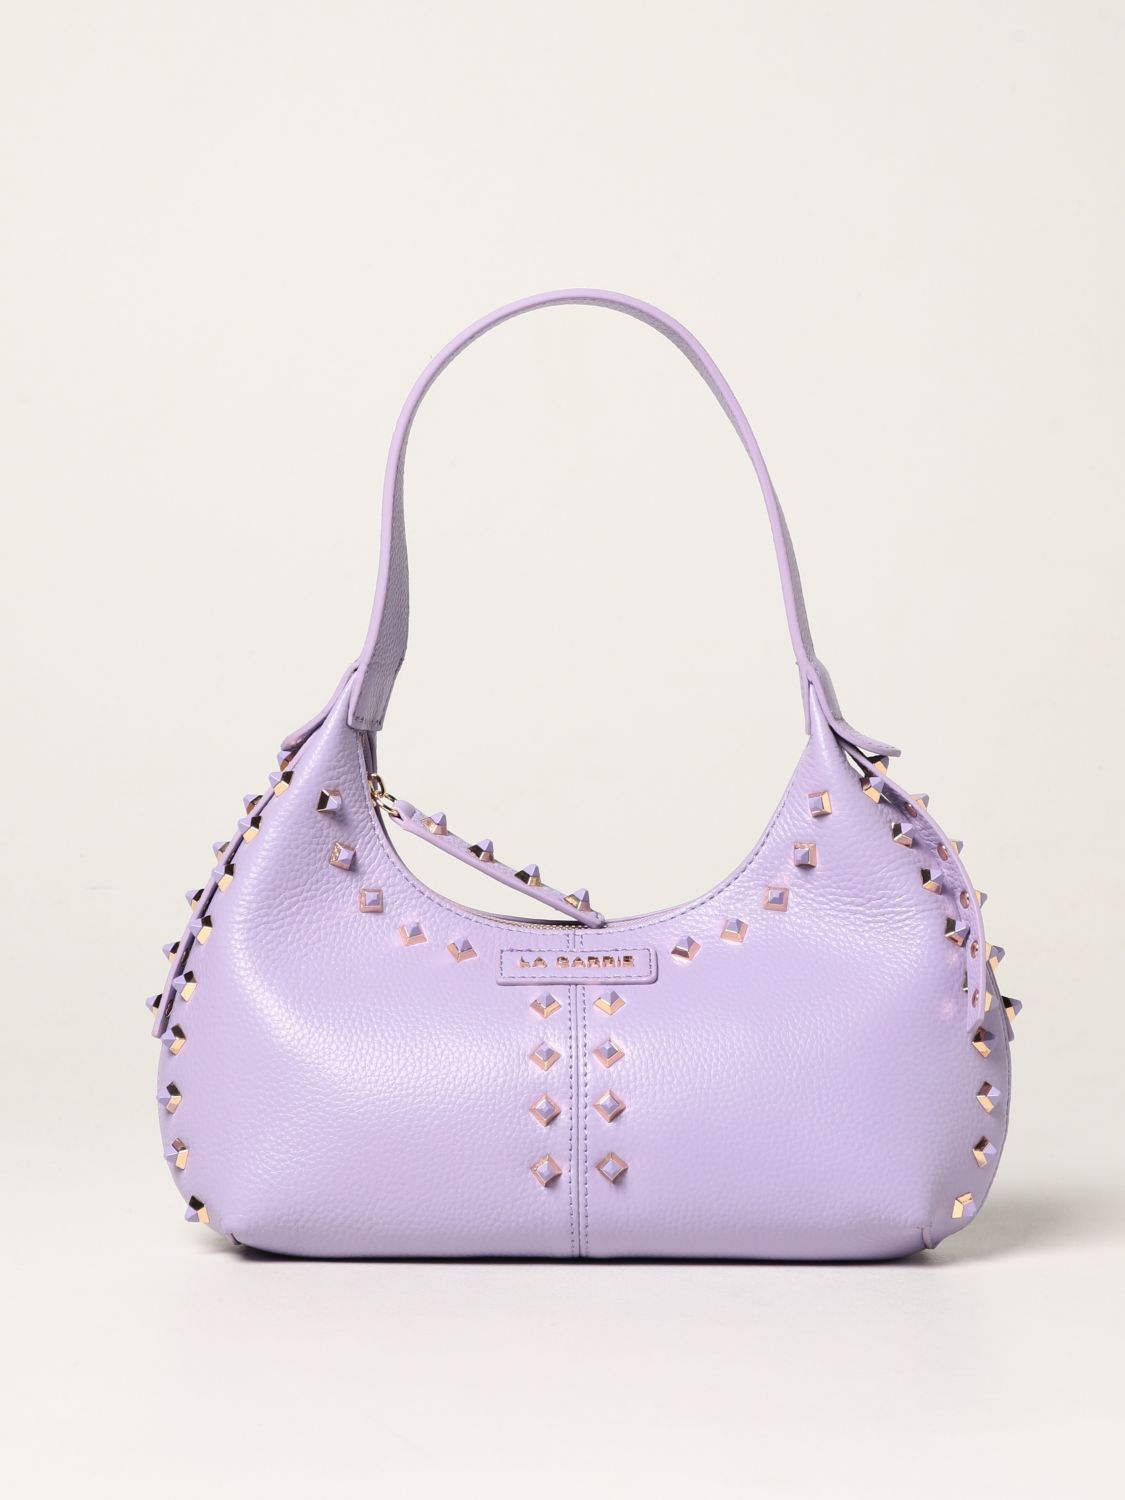 La Carrie Crossbody Bag In Textured Leather In Lilac | ModeSens